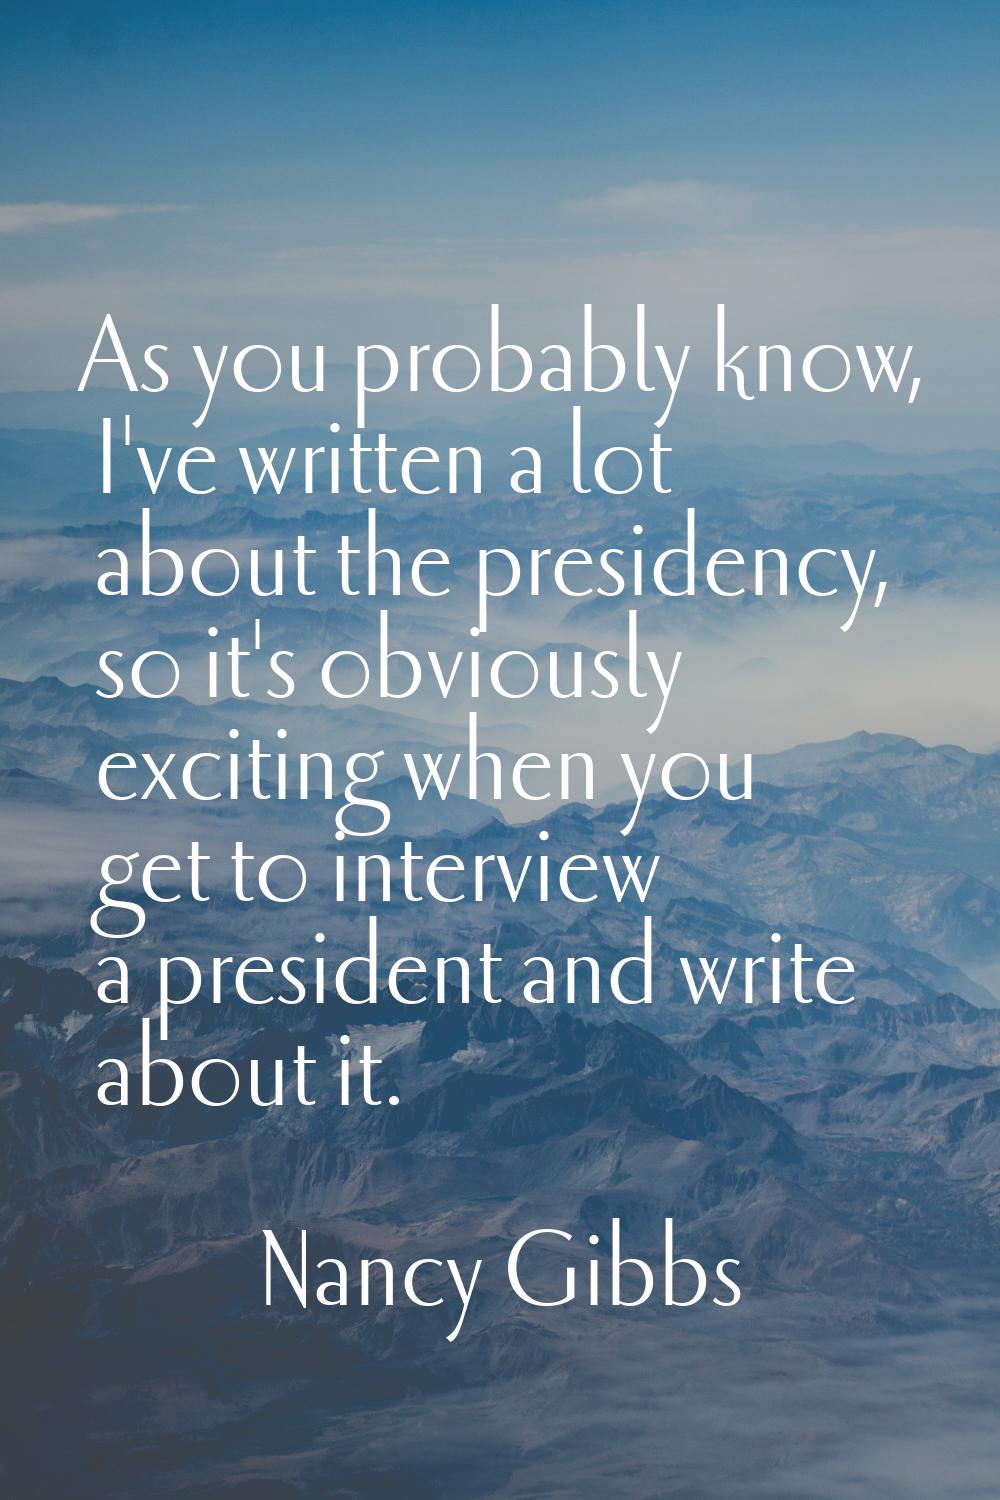 As you probably know, I've written a lot about the presidency, so it's obviously exciting when you 